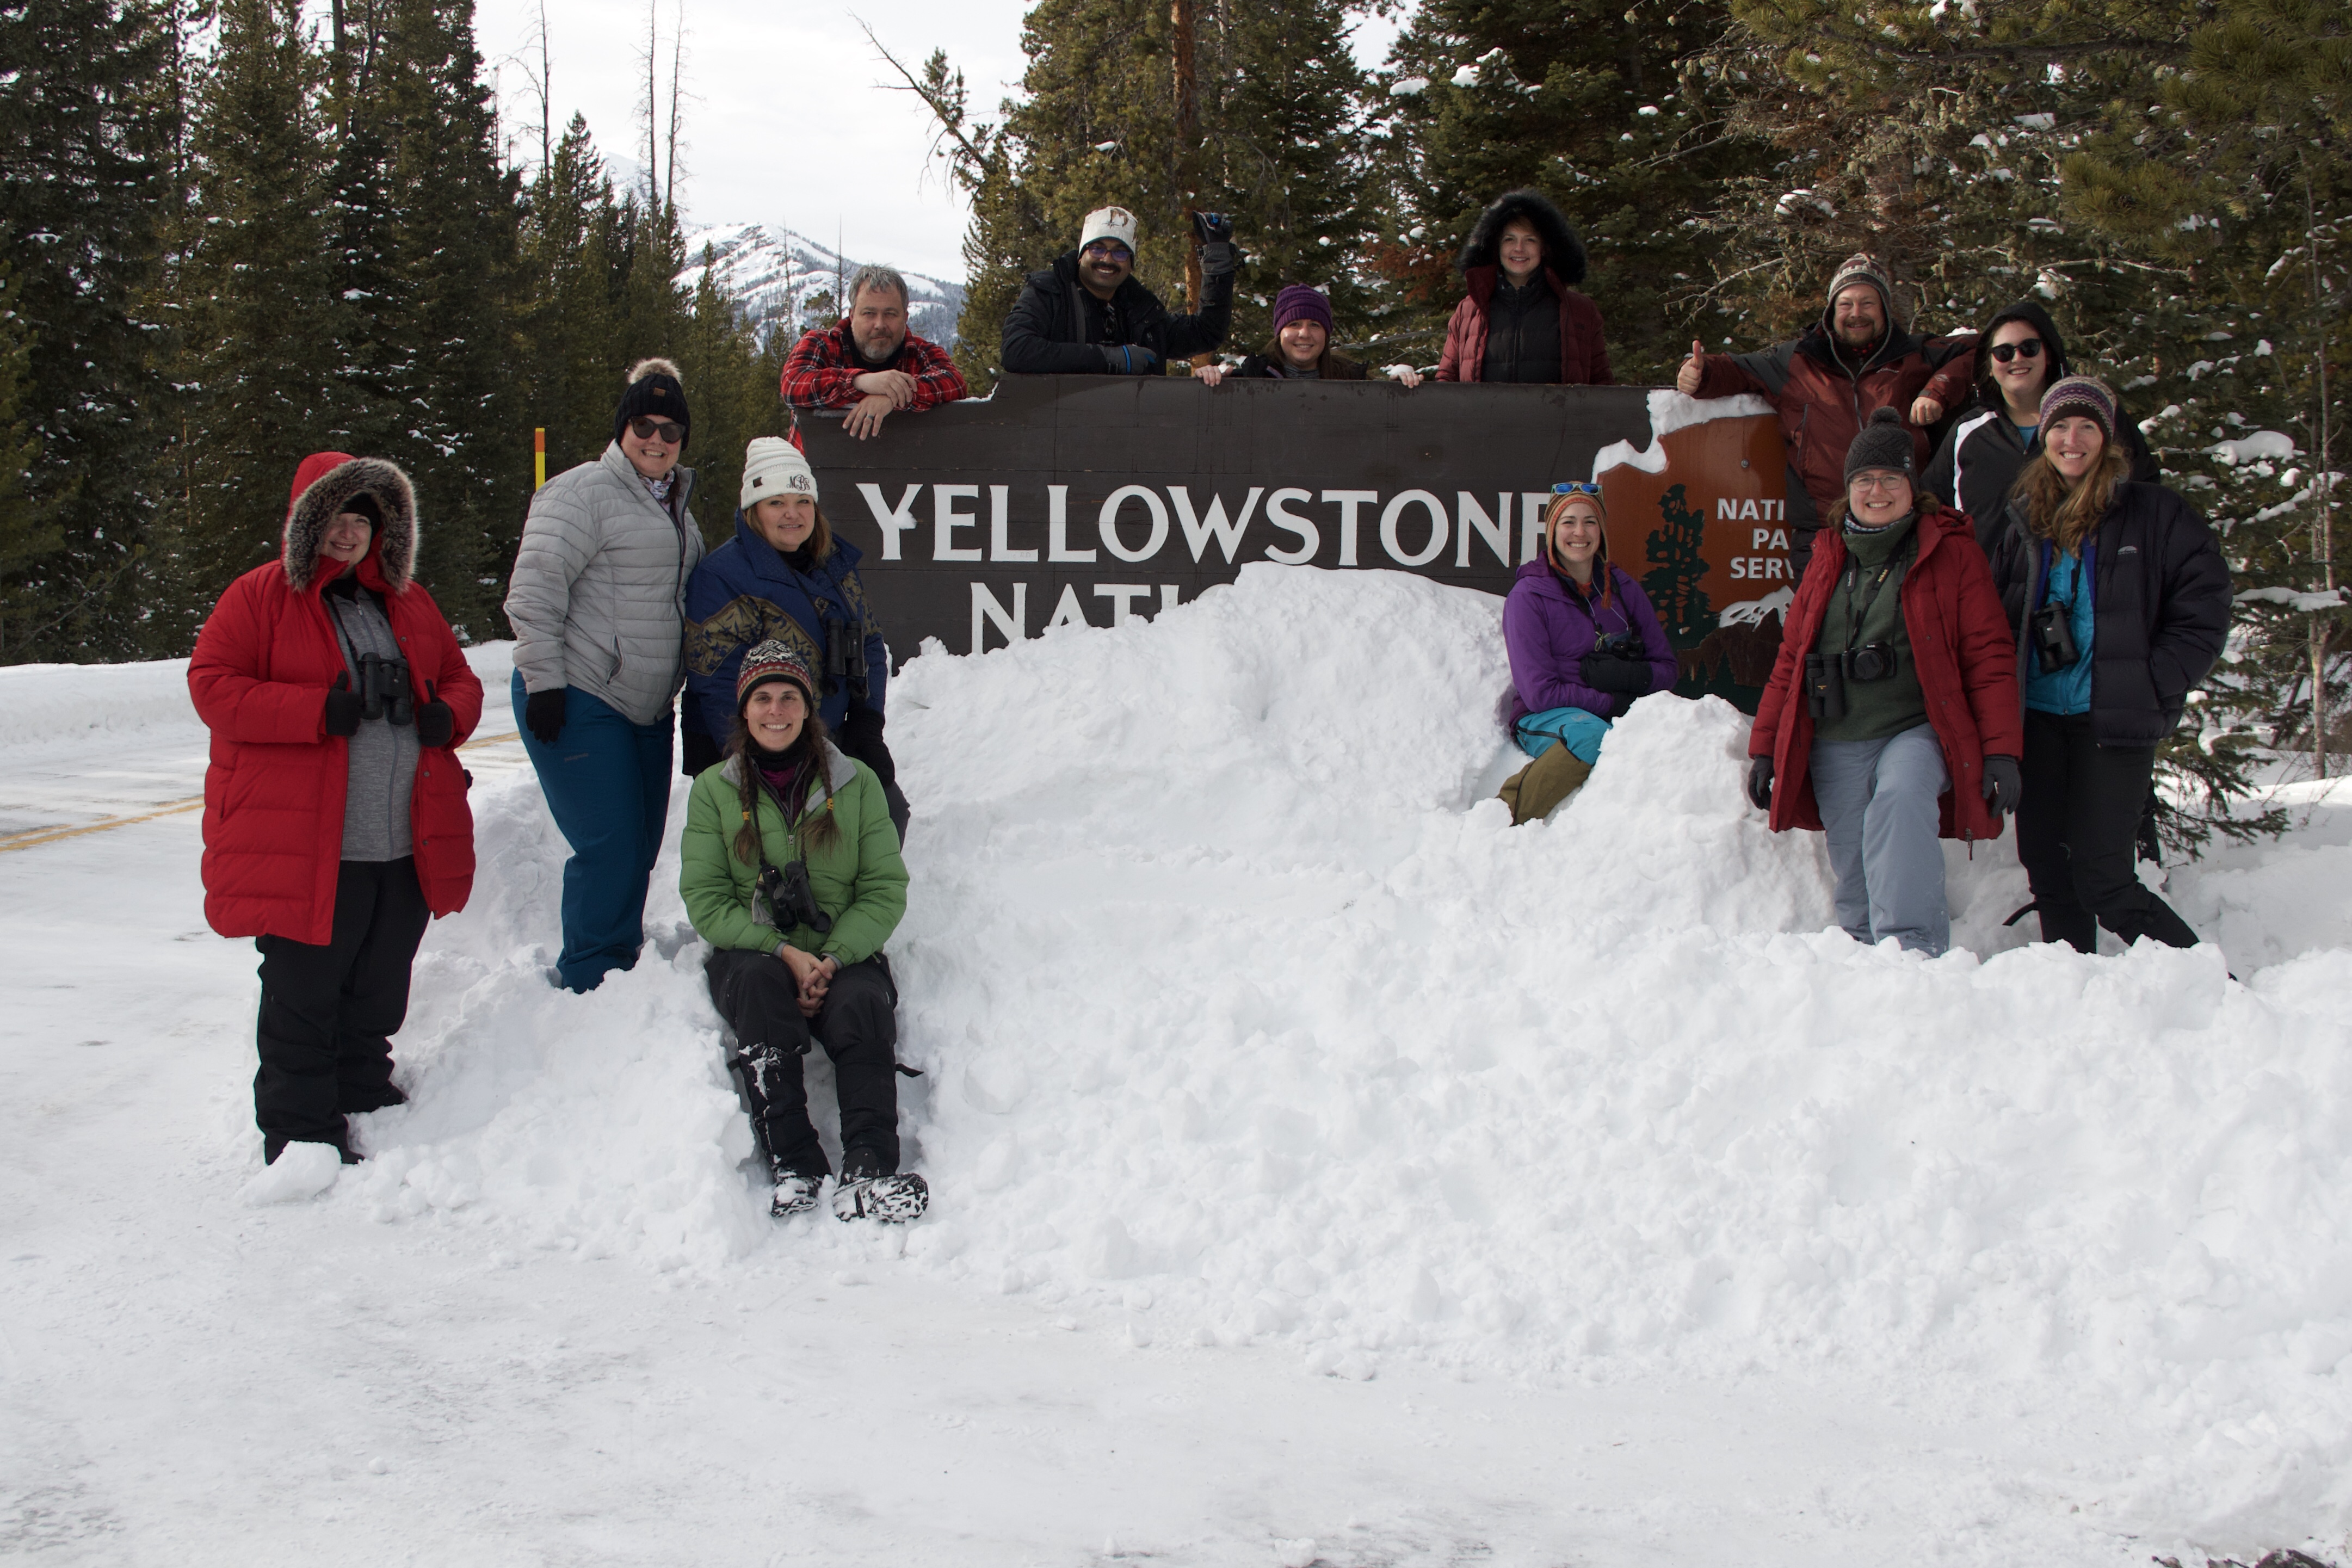 The group at the entrance to Yellowstone National Park